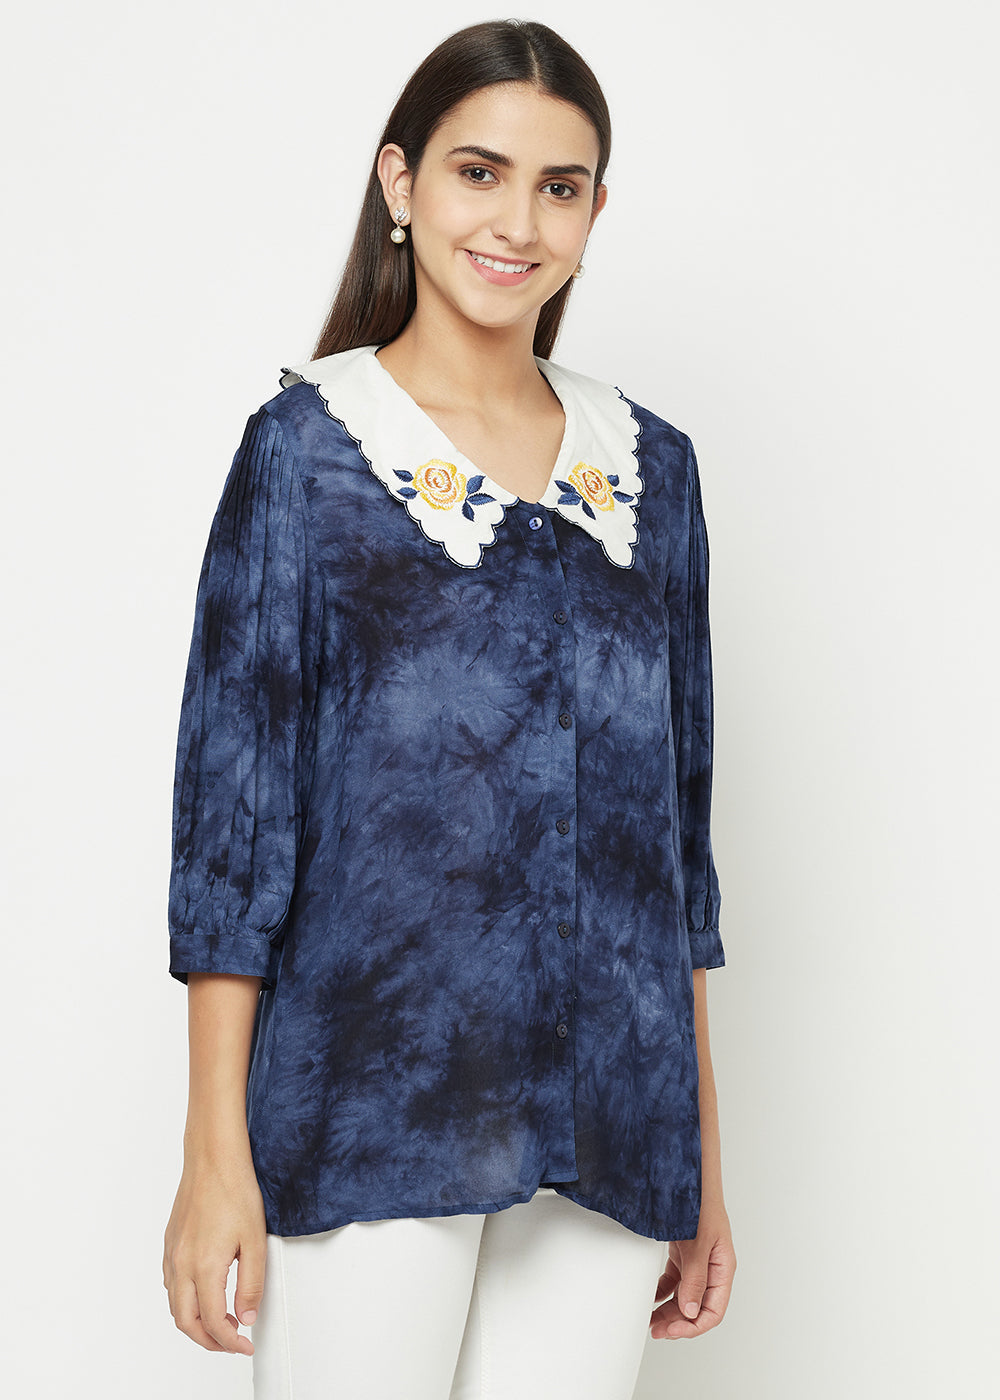 Embroidered Collar Tie-Dye Tunic